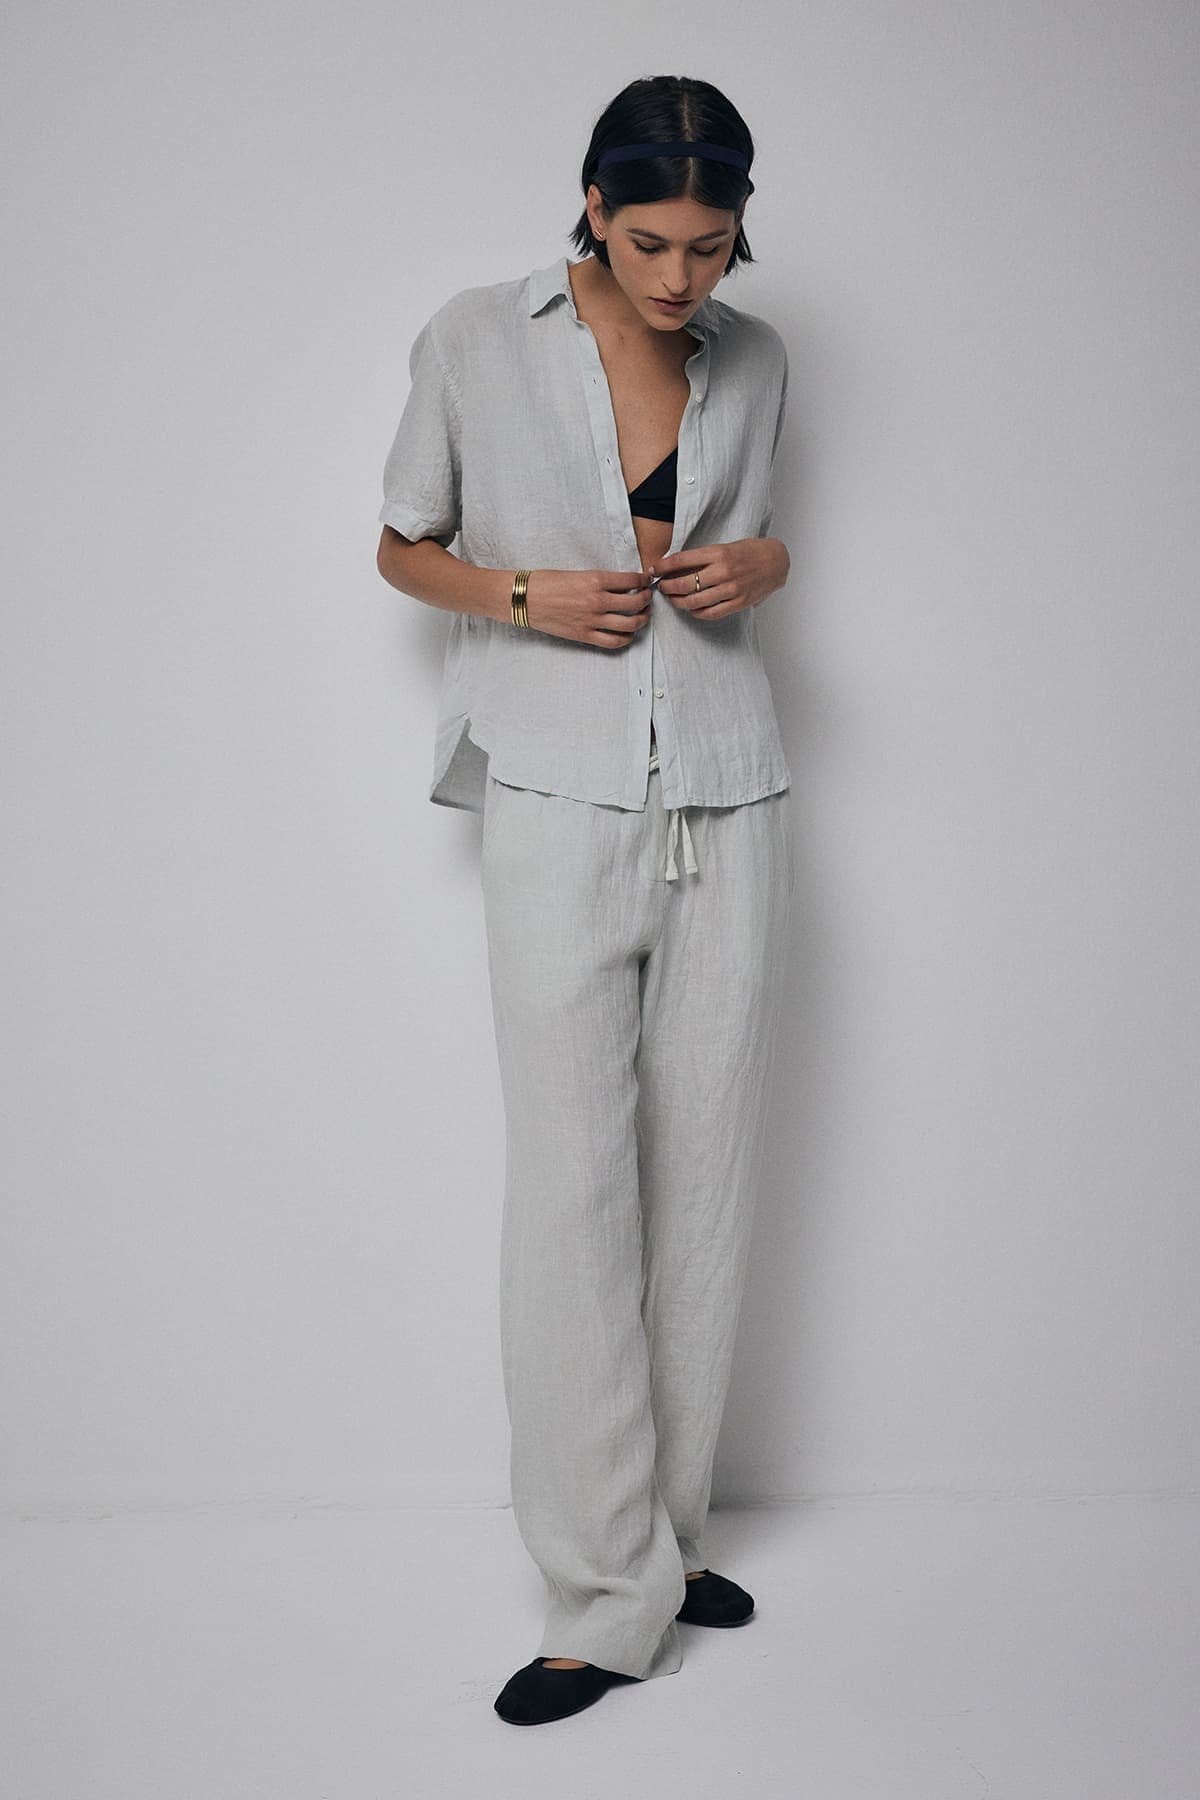 Model wearing the Claremont Top and Pico Linen Pant